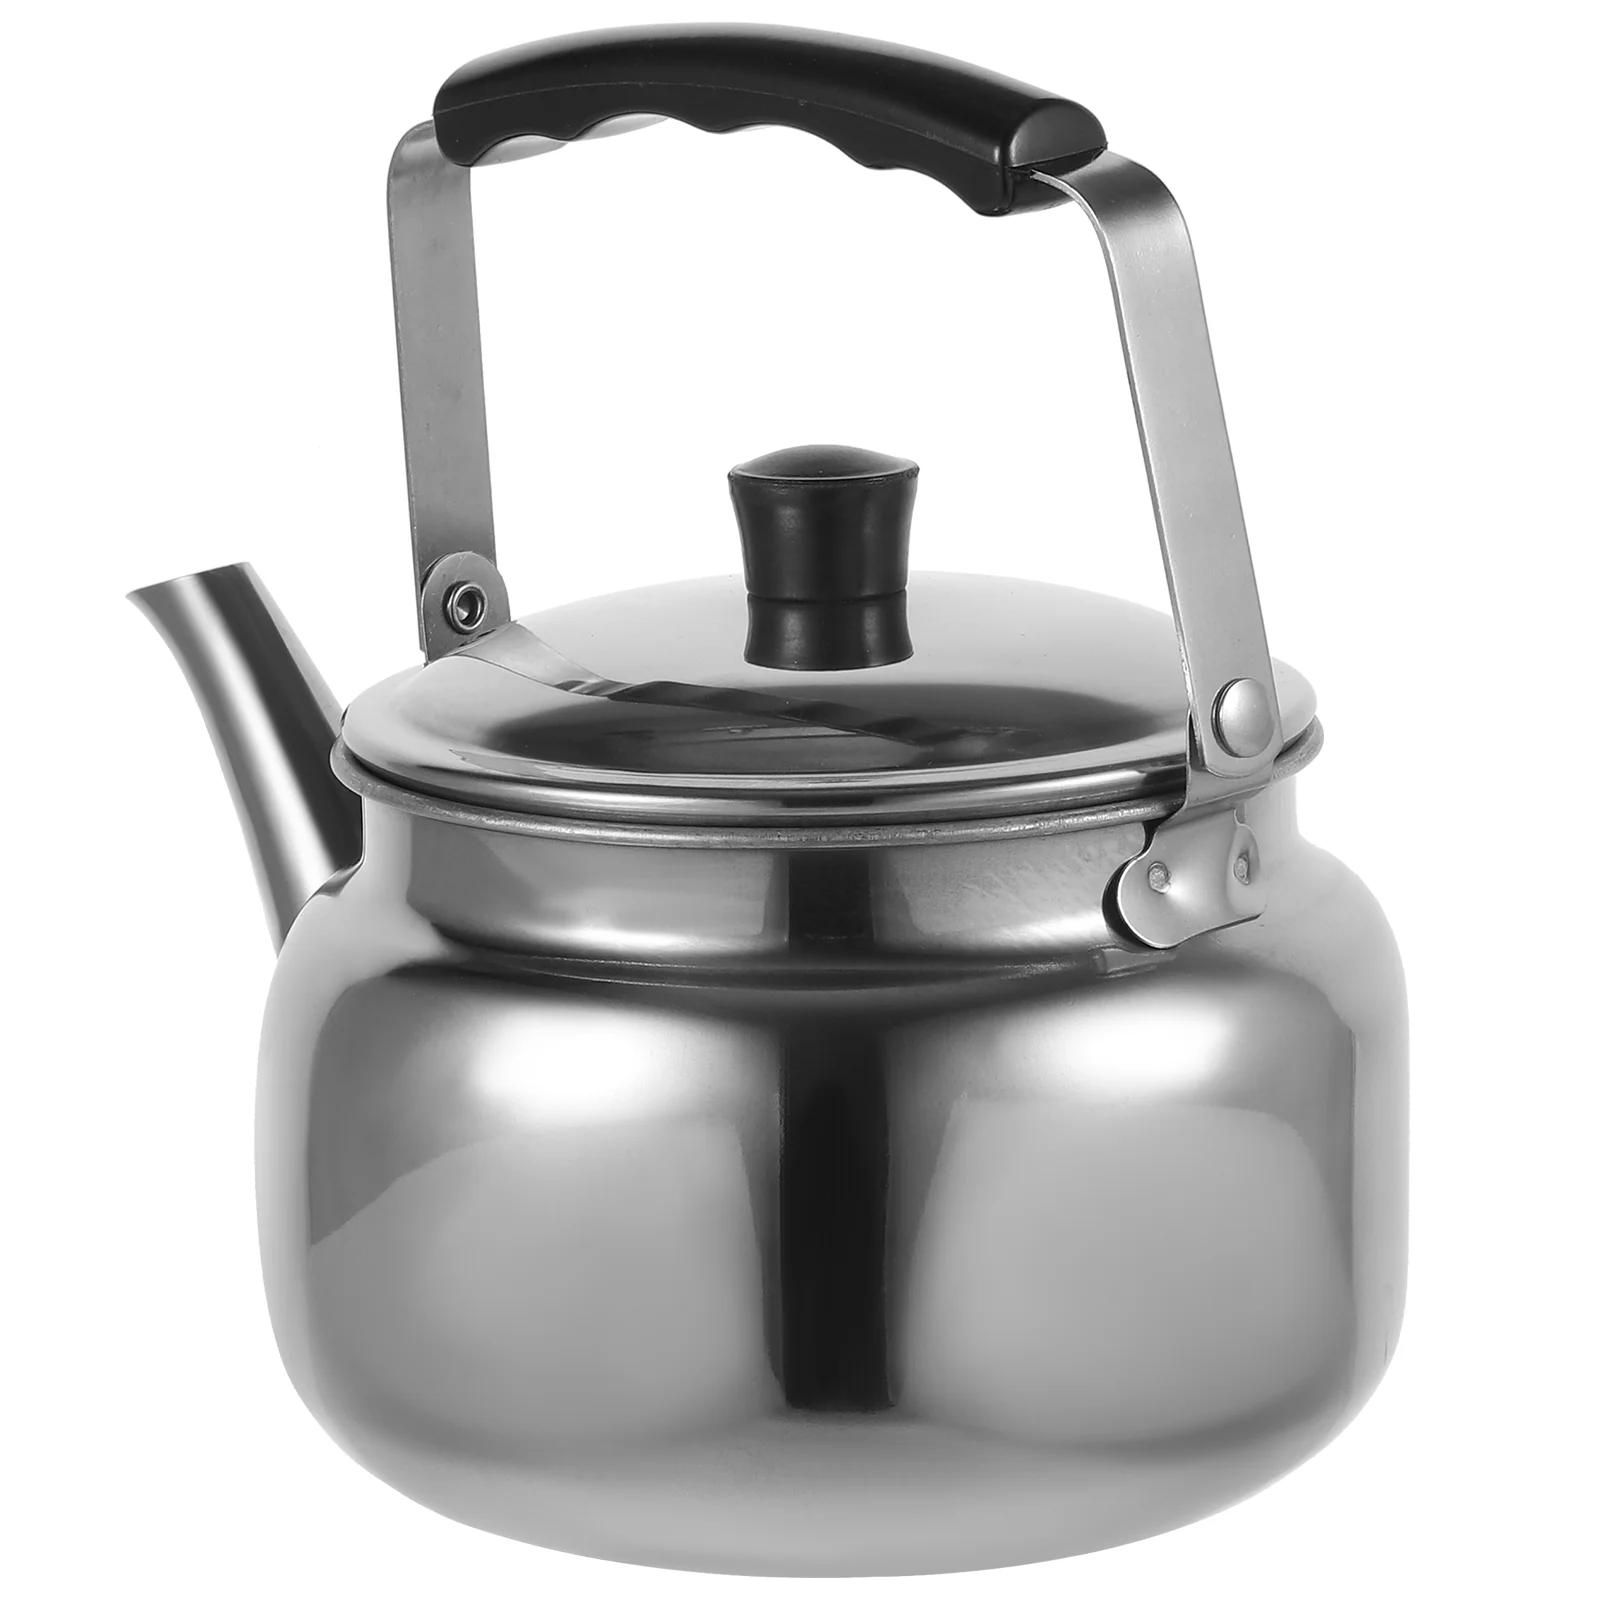 

Pot Household Heating Water Kettle Home Prcatical Teakettle Stainless Steel Coffee